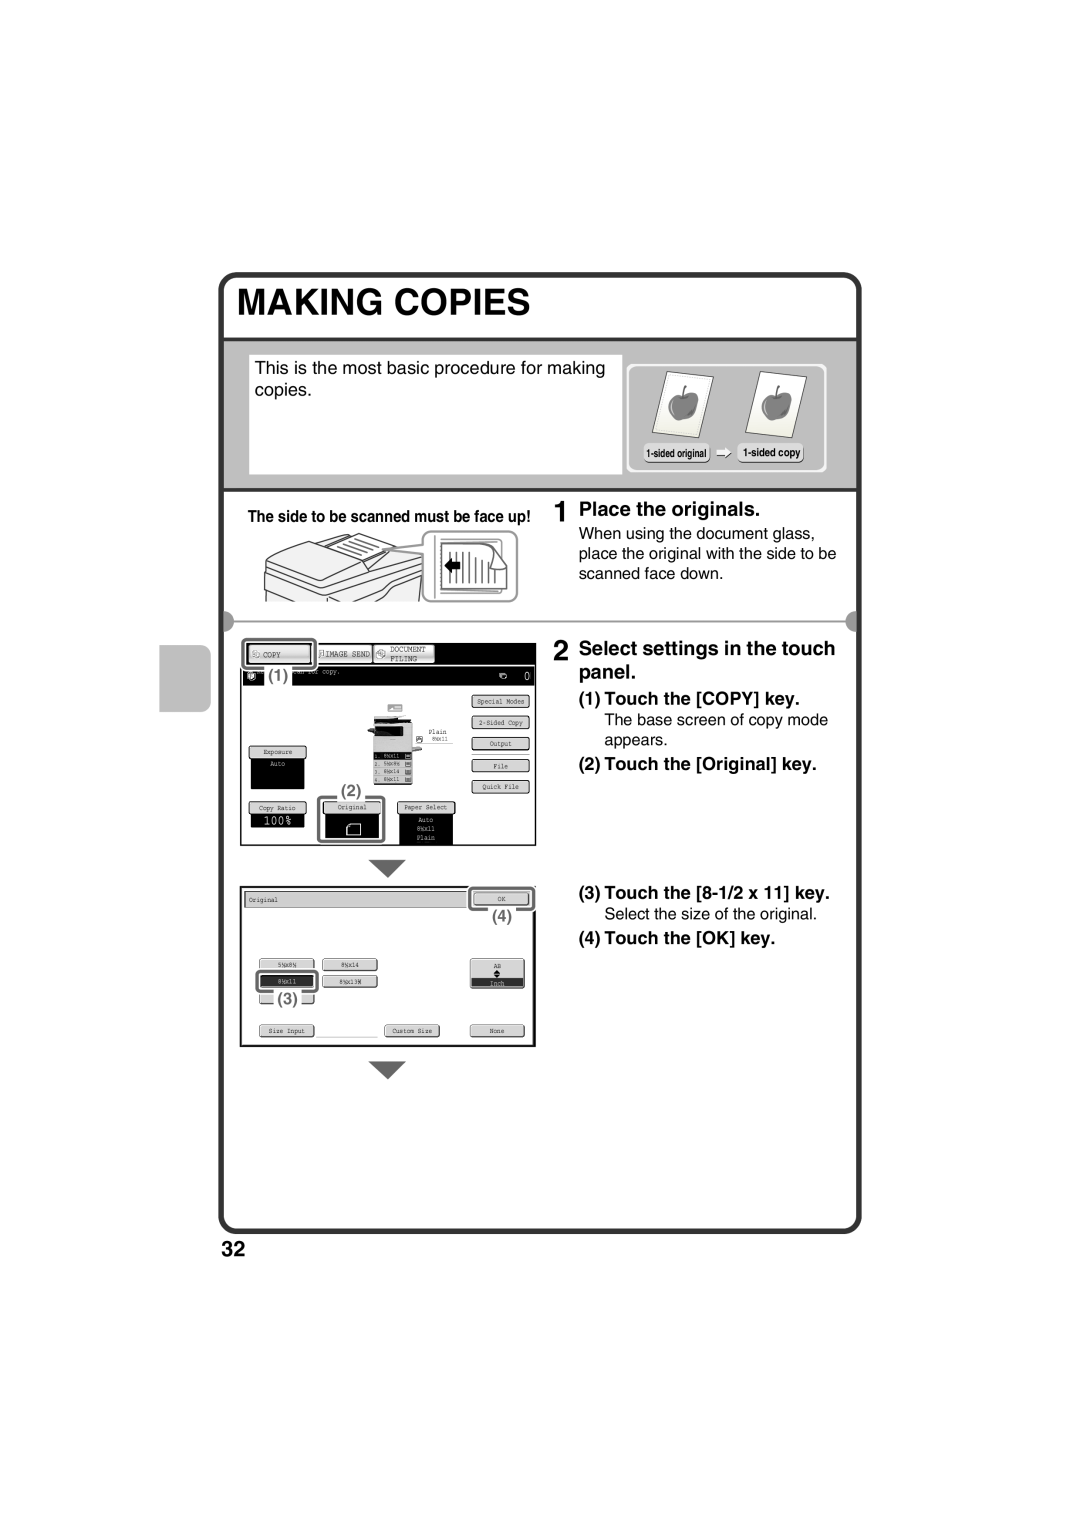 Sharp MX-B401 Making Copies, Select settings in the touch panel, Touch the COPY key, Touch the Original key, 100%, Copy 